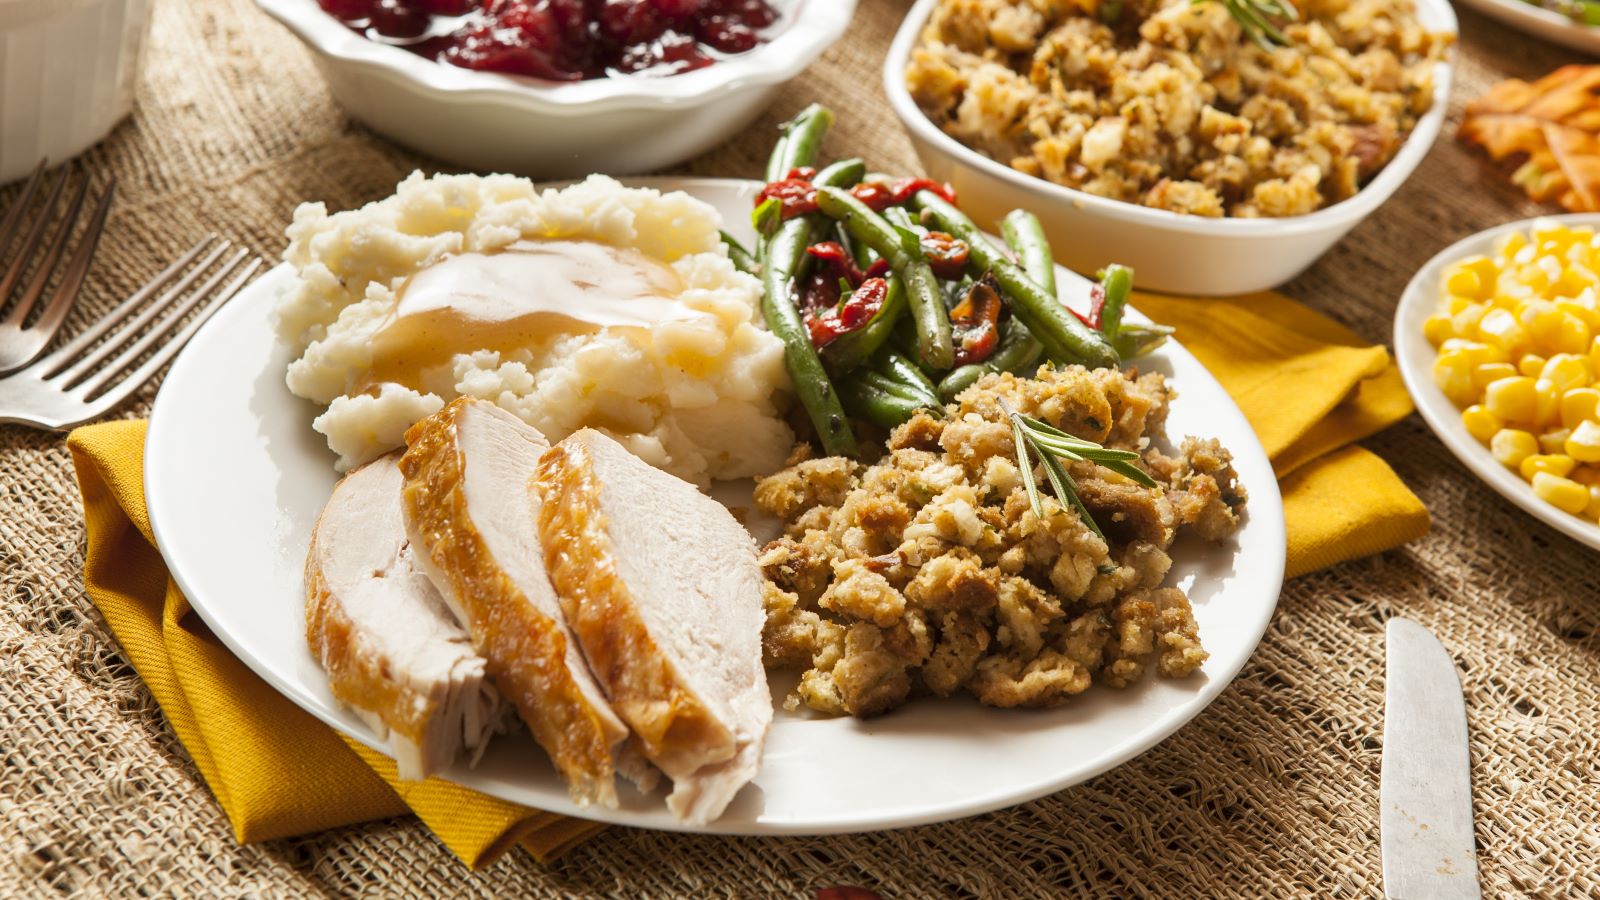 5 Unhealthy Meals to Look Out for This Thanksgiving | Hartford HealthCare